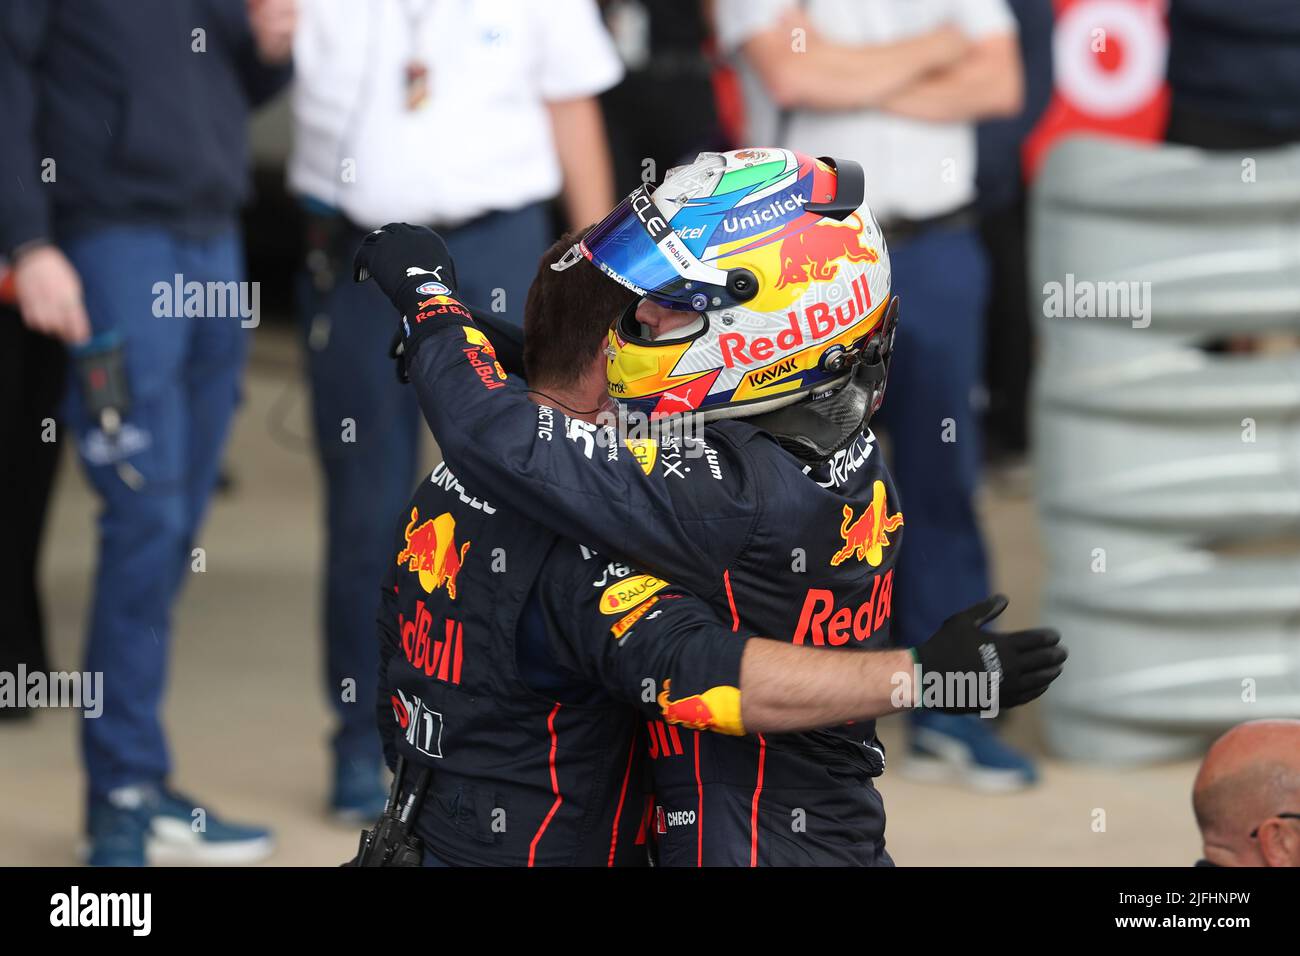 Silverstone, UK. 3rd July 2022,  Silverstone Circuit, Silverstone, Northamptonshire, England: British F1 Grand Prix, Race day: Oracle Red Bull Racing, Sergio Perez comes second and is hugged by a team member Credit: Action Plus Sports Images/Alamy Live News Stock Photo